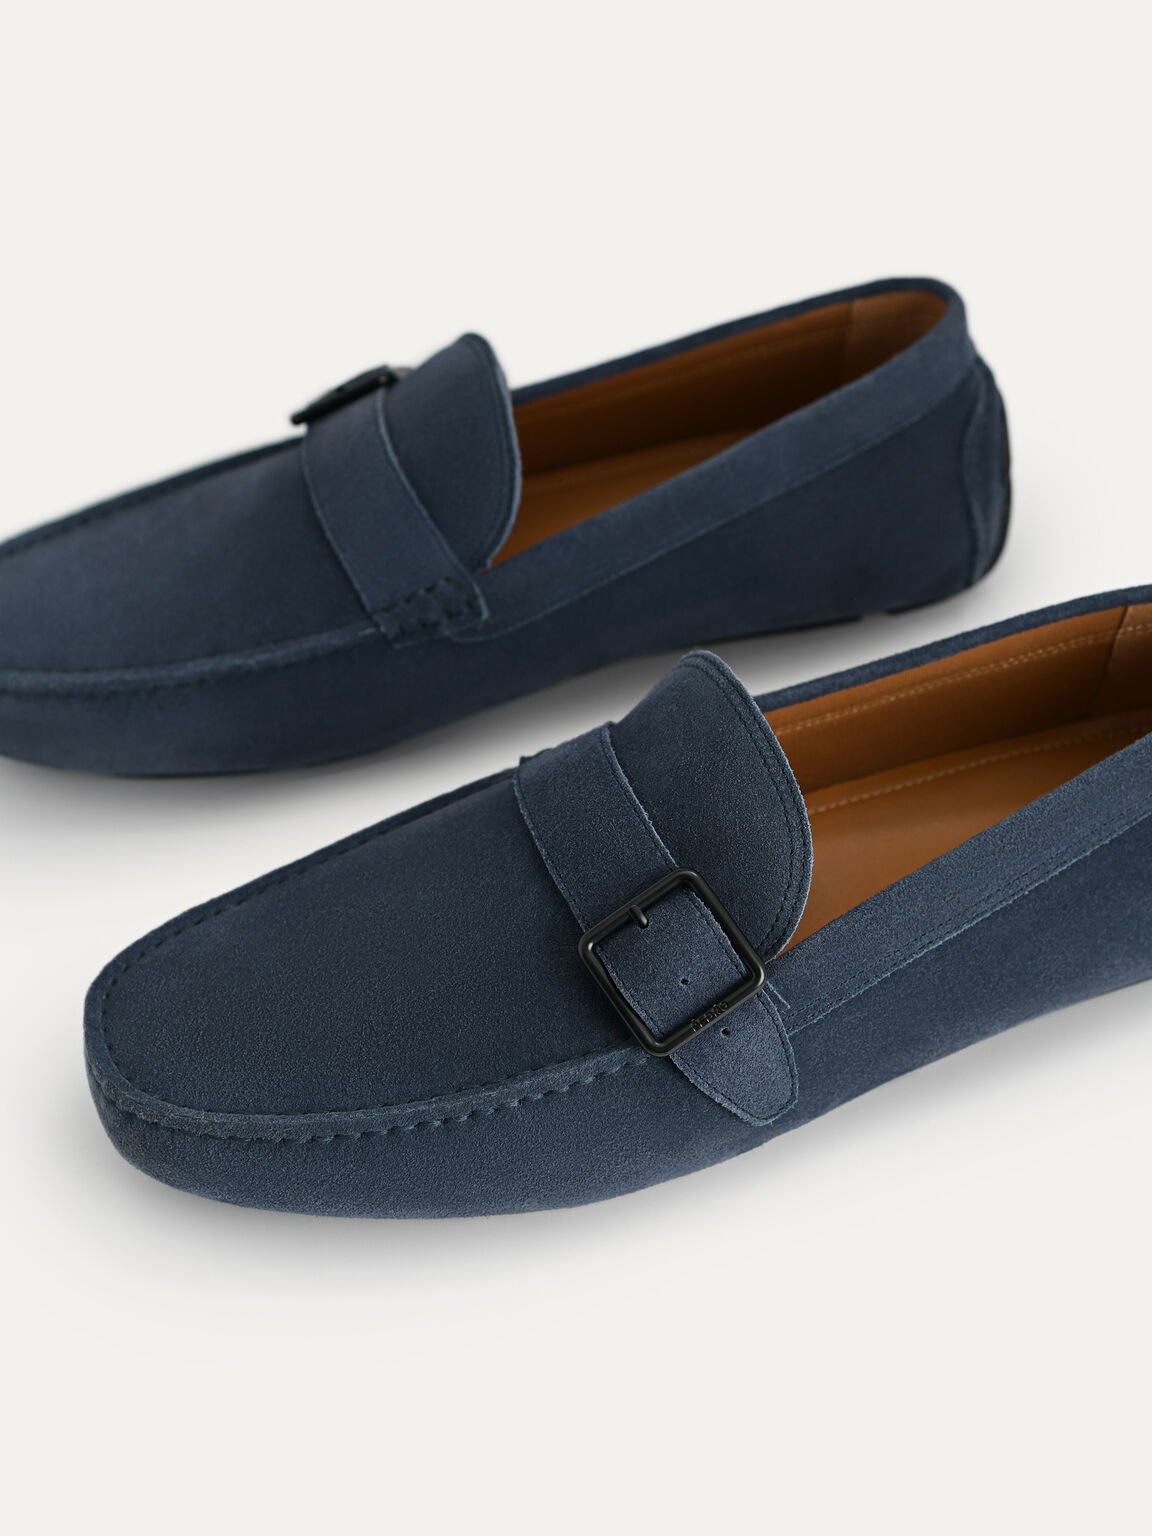 Suede Leather Moccasins with Buckle Detailing, Navy, hi-res